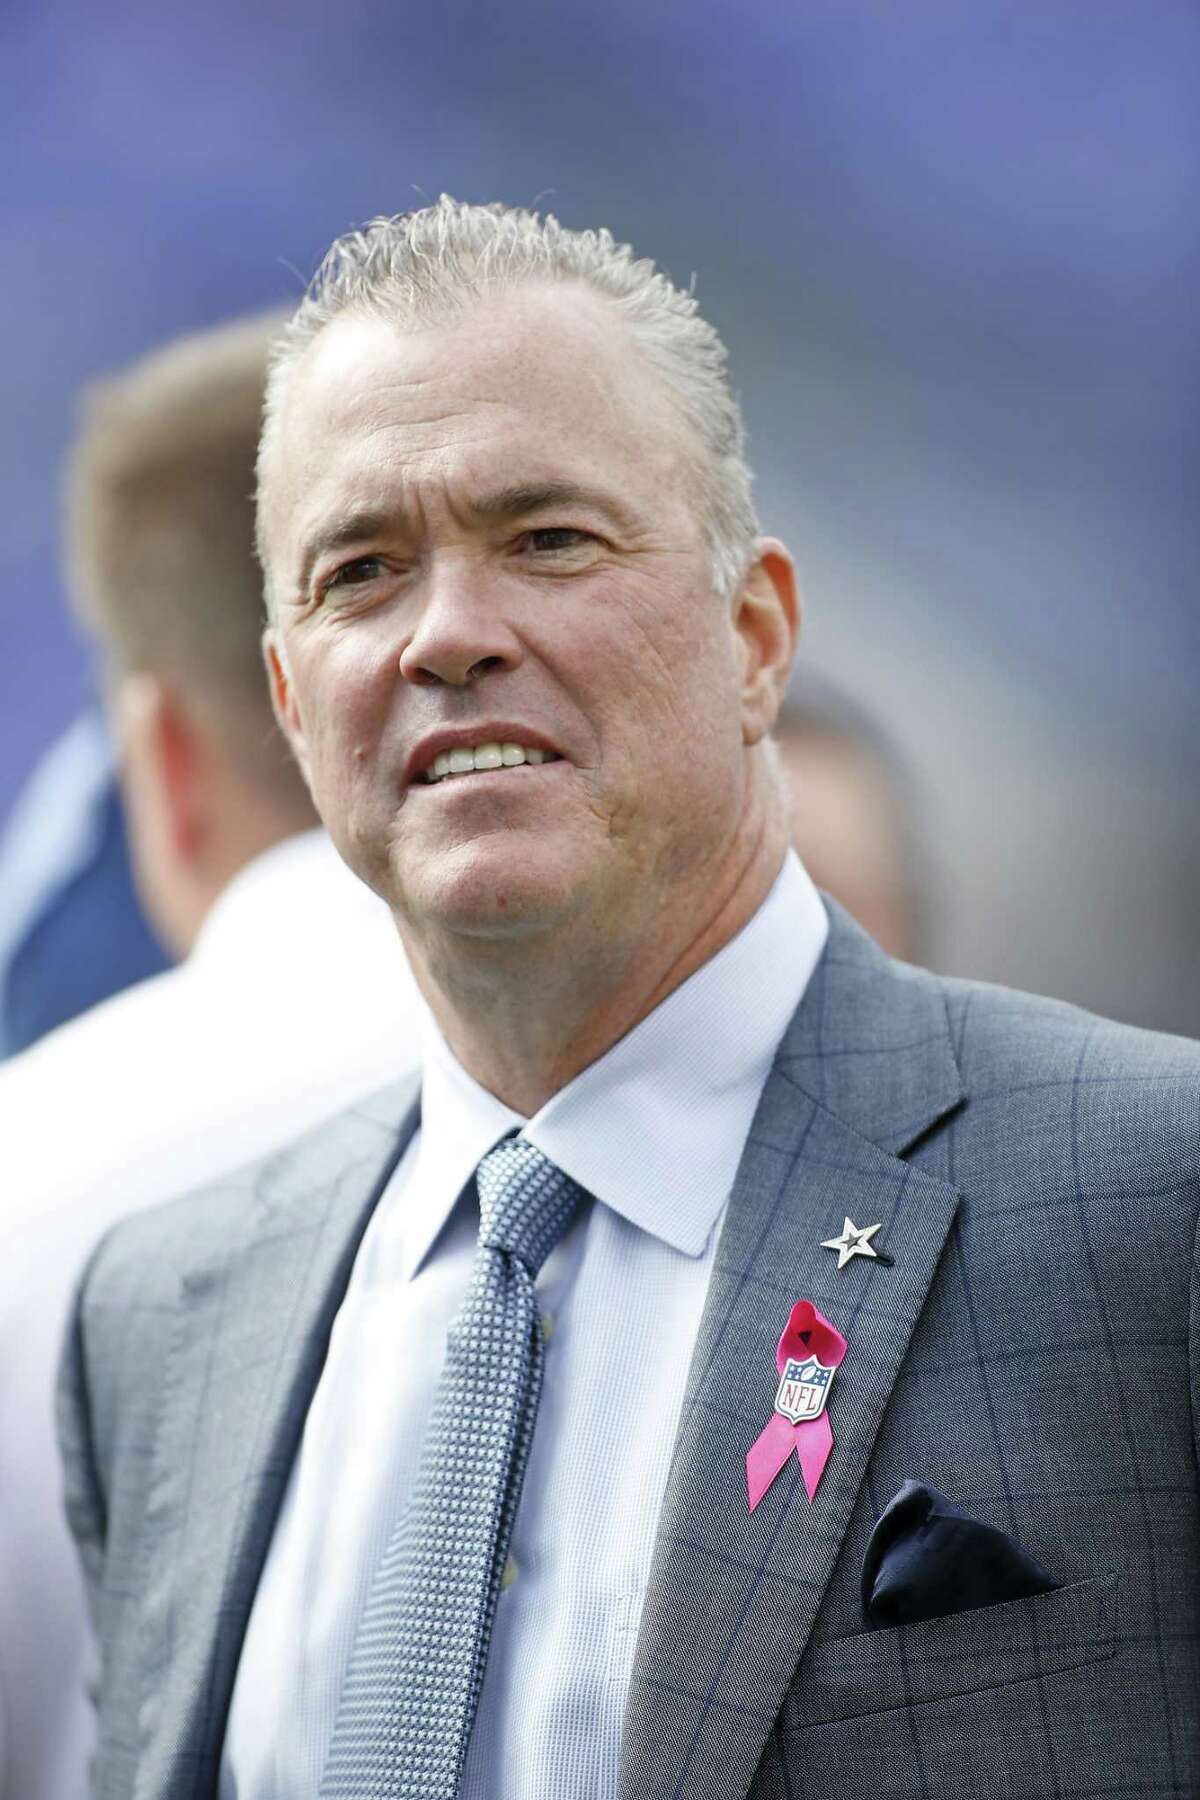 Dallas Cowboys’ chief operating officer and executive vice president Stephen Jones on Oct. 14, 2012 during a Cowboys game at Baltimore.